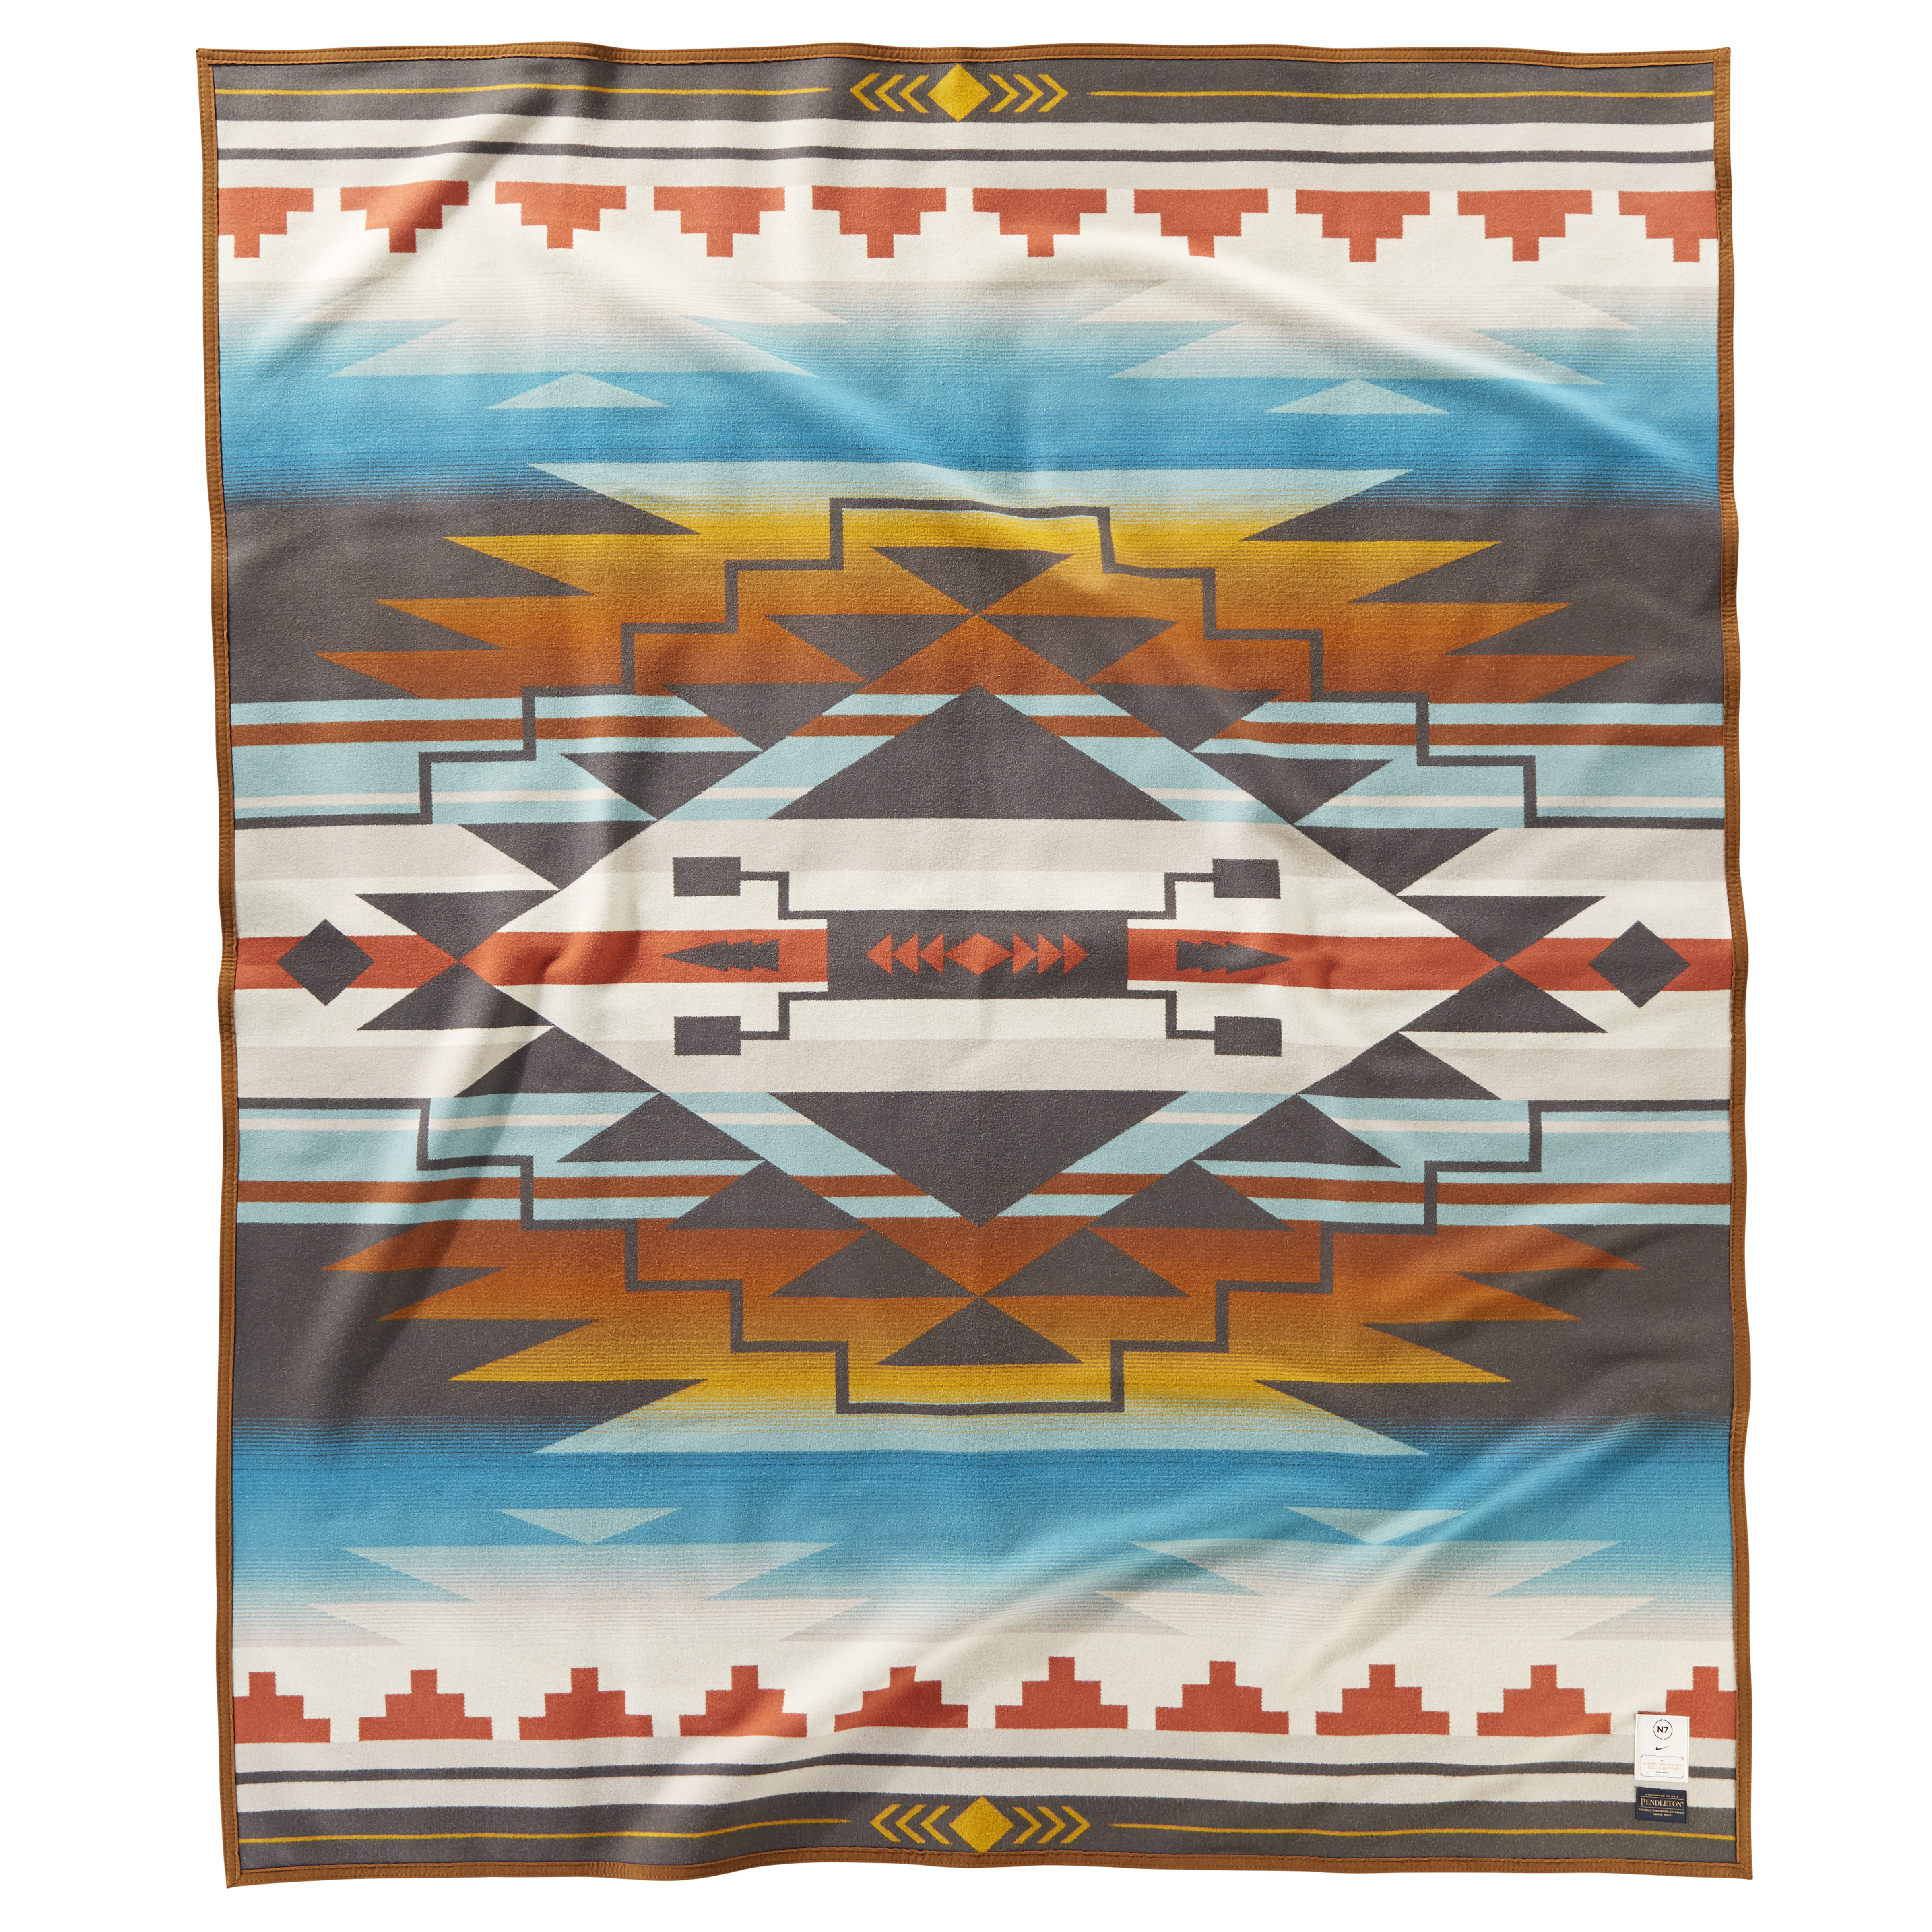 7 Generations blanket designed by Tracie Jackson (Dine’), a fourth-generation artisan from Star Mountain, in Navajo Country, AZ.  The Nike N7 design, 7 Generations, illustrates the past, present and future of the Navajo Nation. 